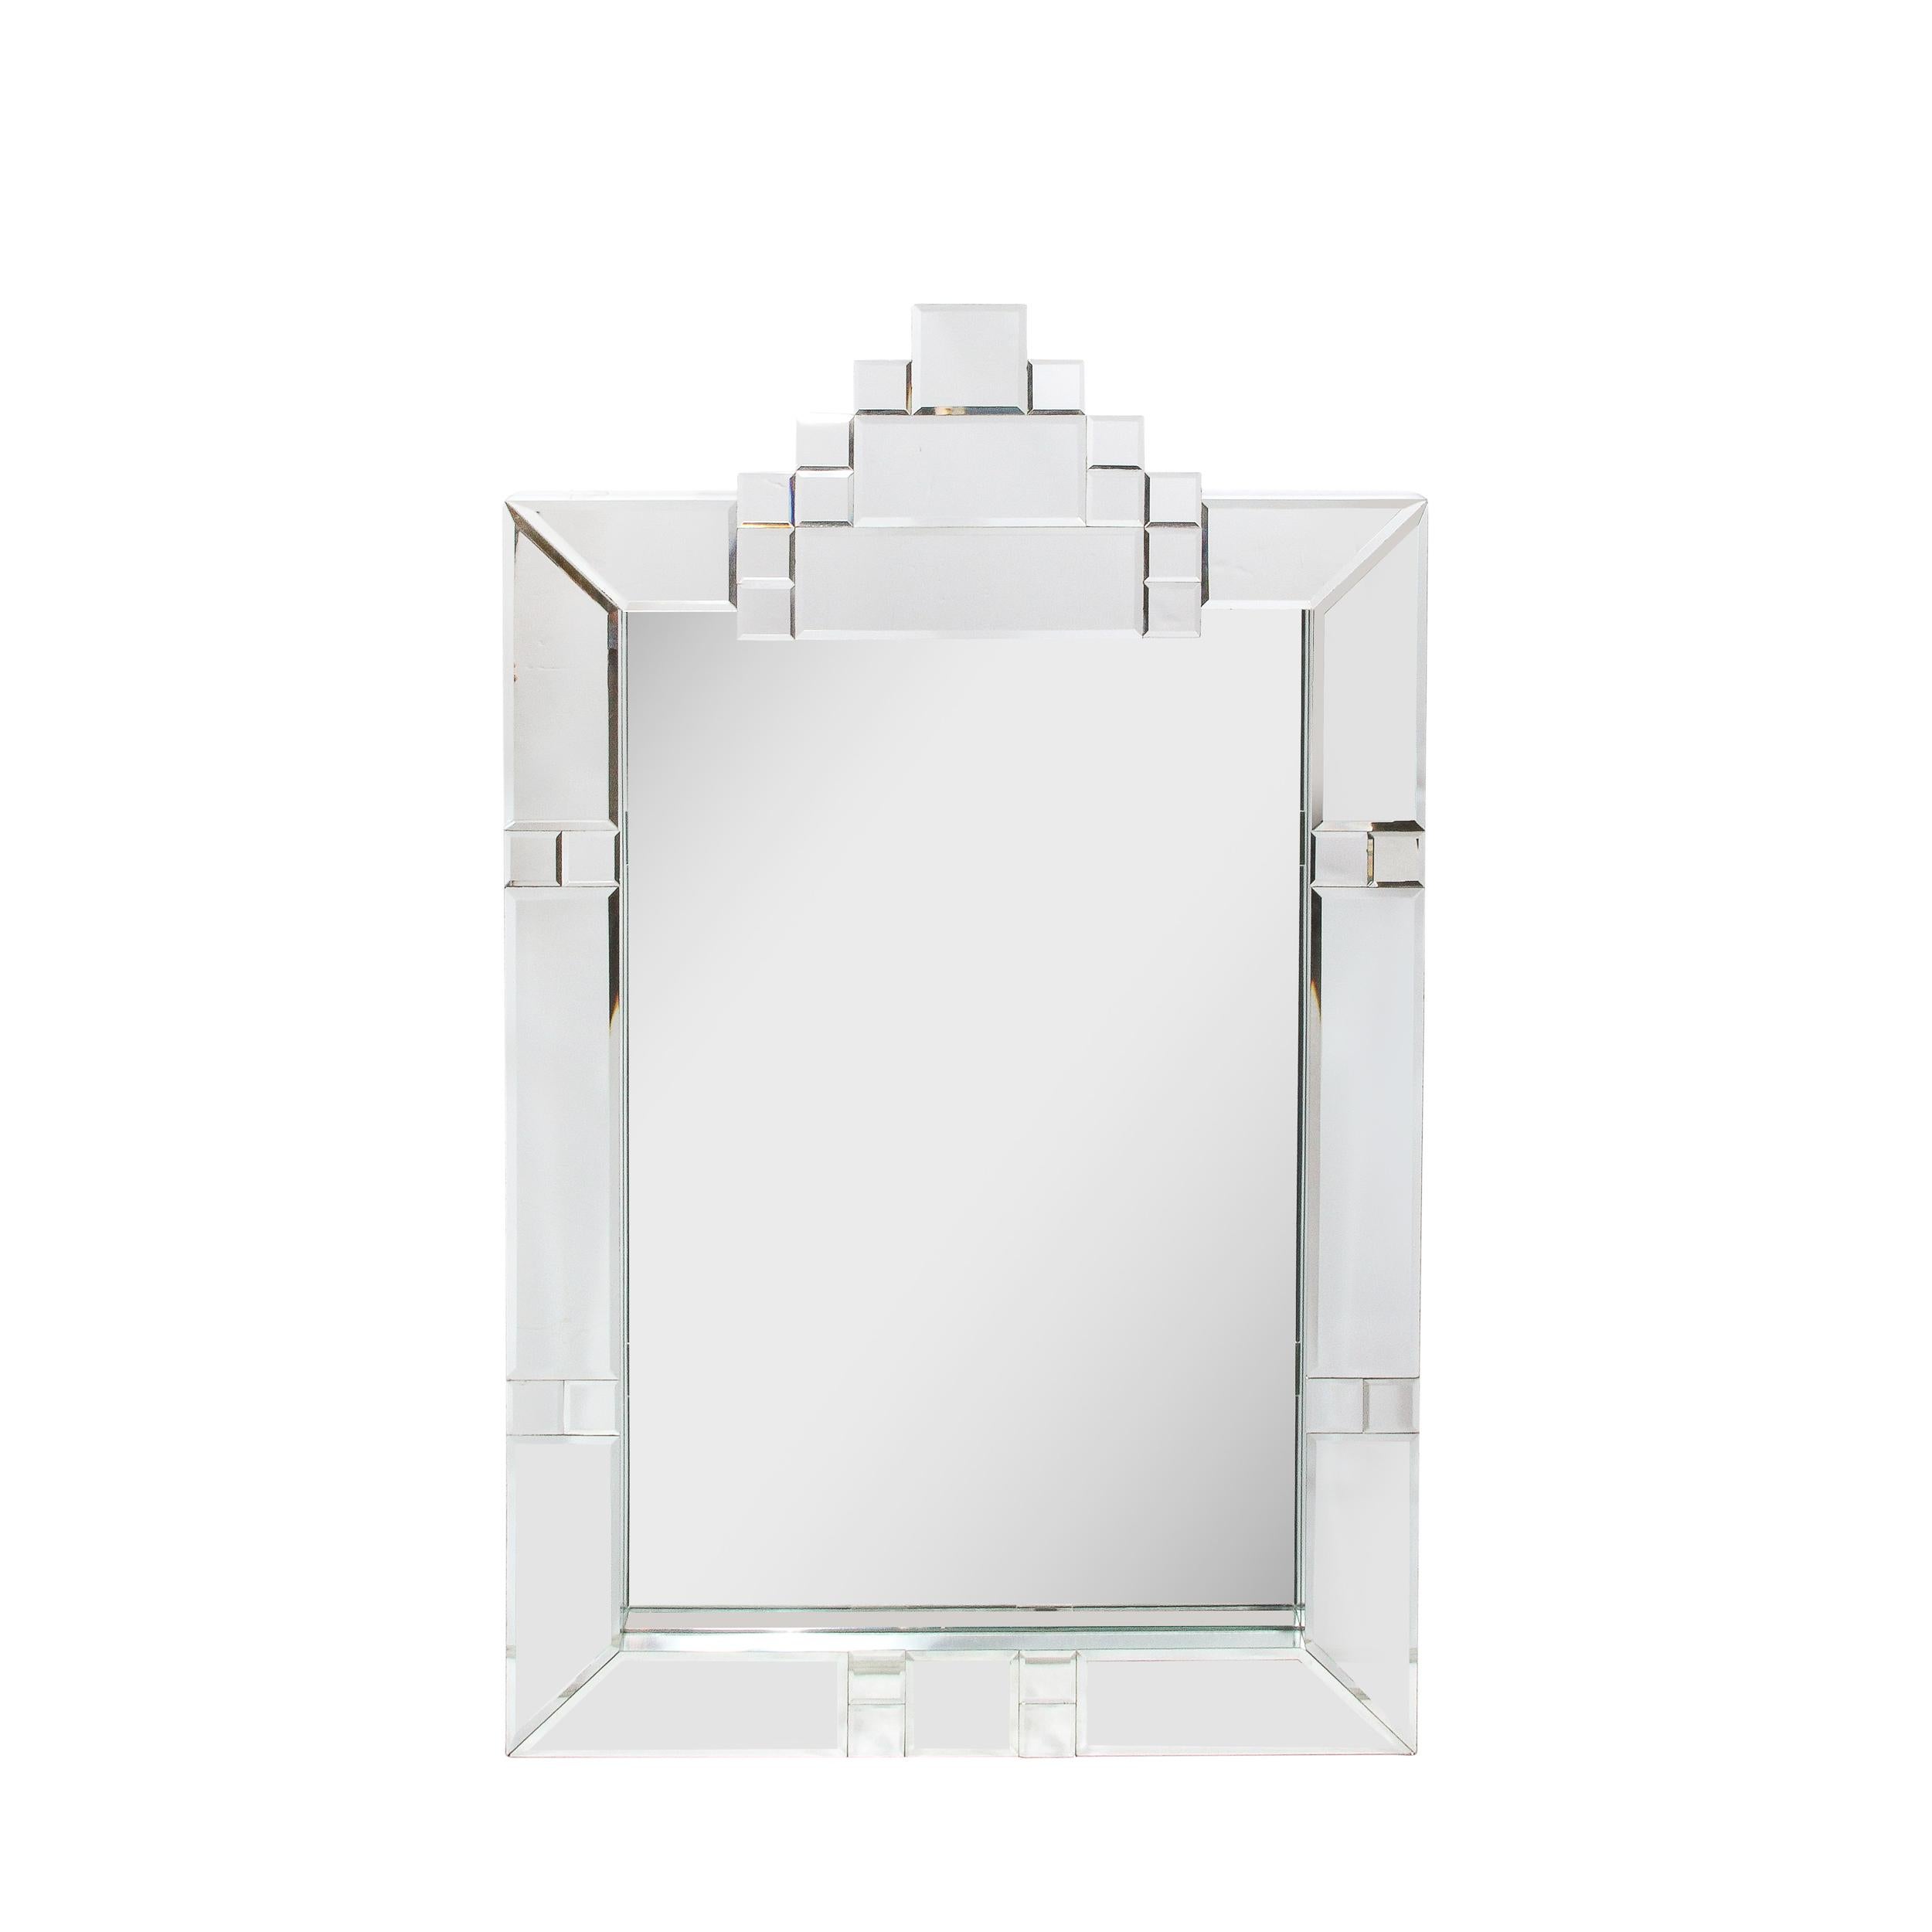 This modernist Art Deco style geometric mirror was realized in the United States circa 1970. It features a tessellated border consisting of rectangular segments of plain mirror interrupted by rows of adjacent square forms. The top of the mirror is